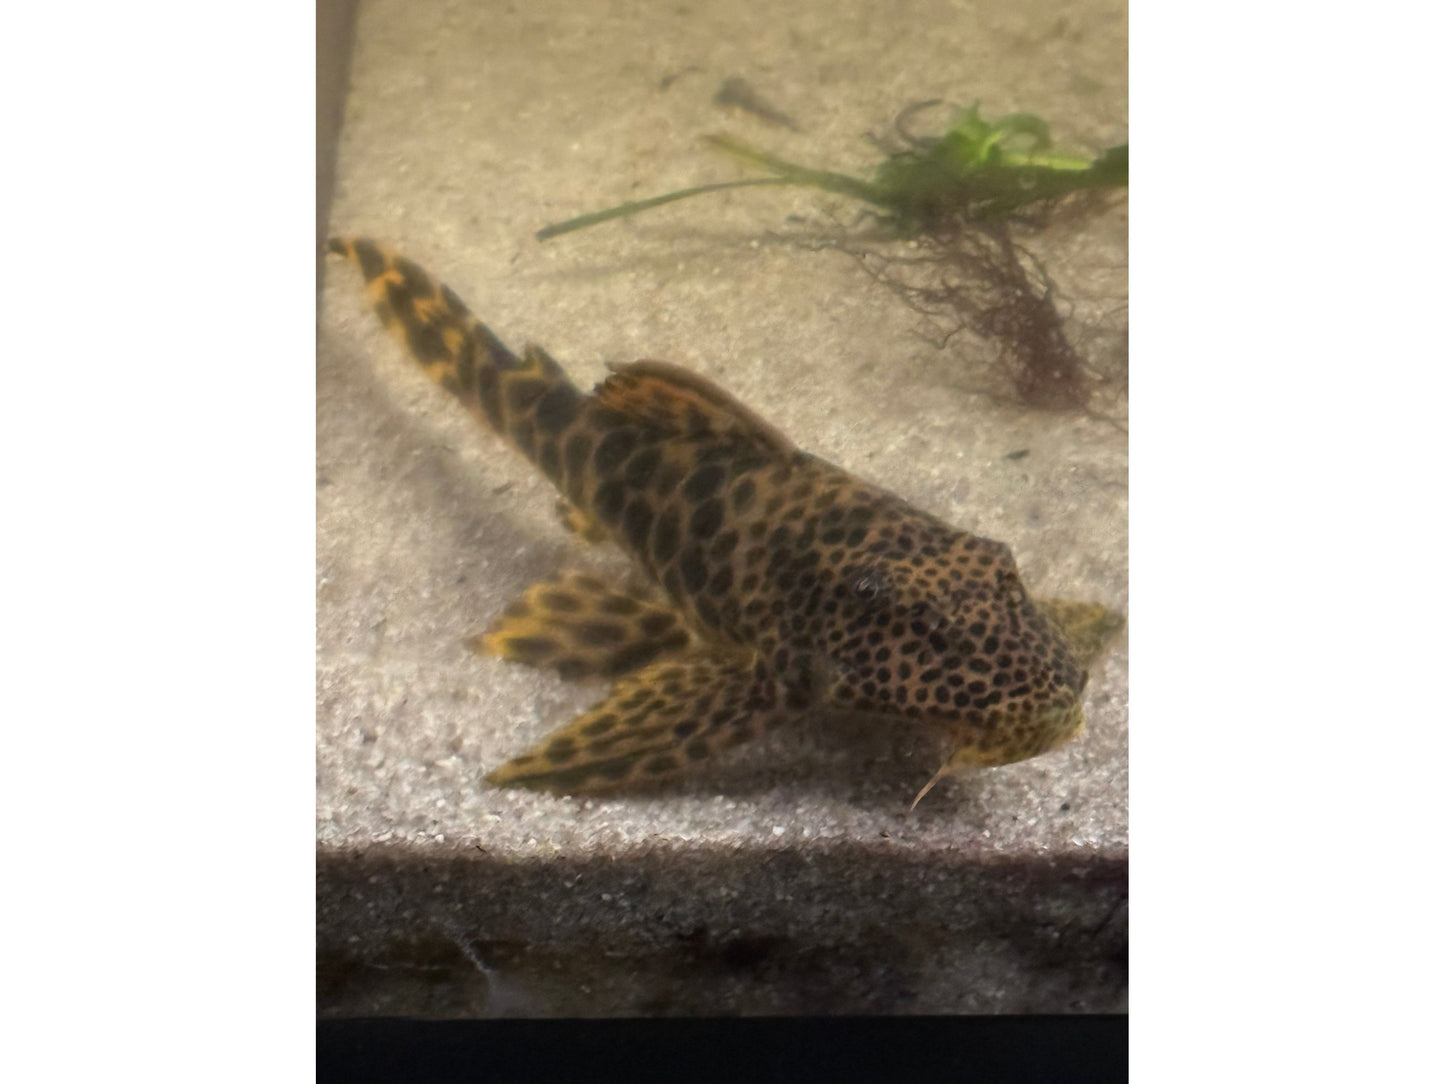 One Para Yellow Spotted Pleco 2.5 - 3” ” L-075. (1189,76)